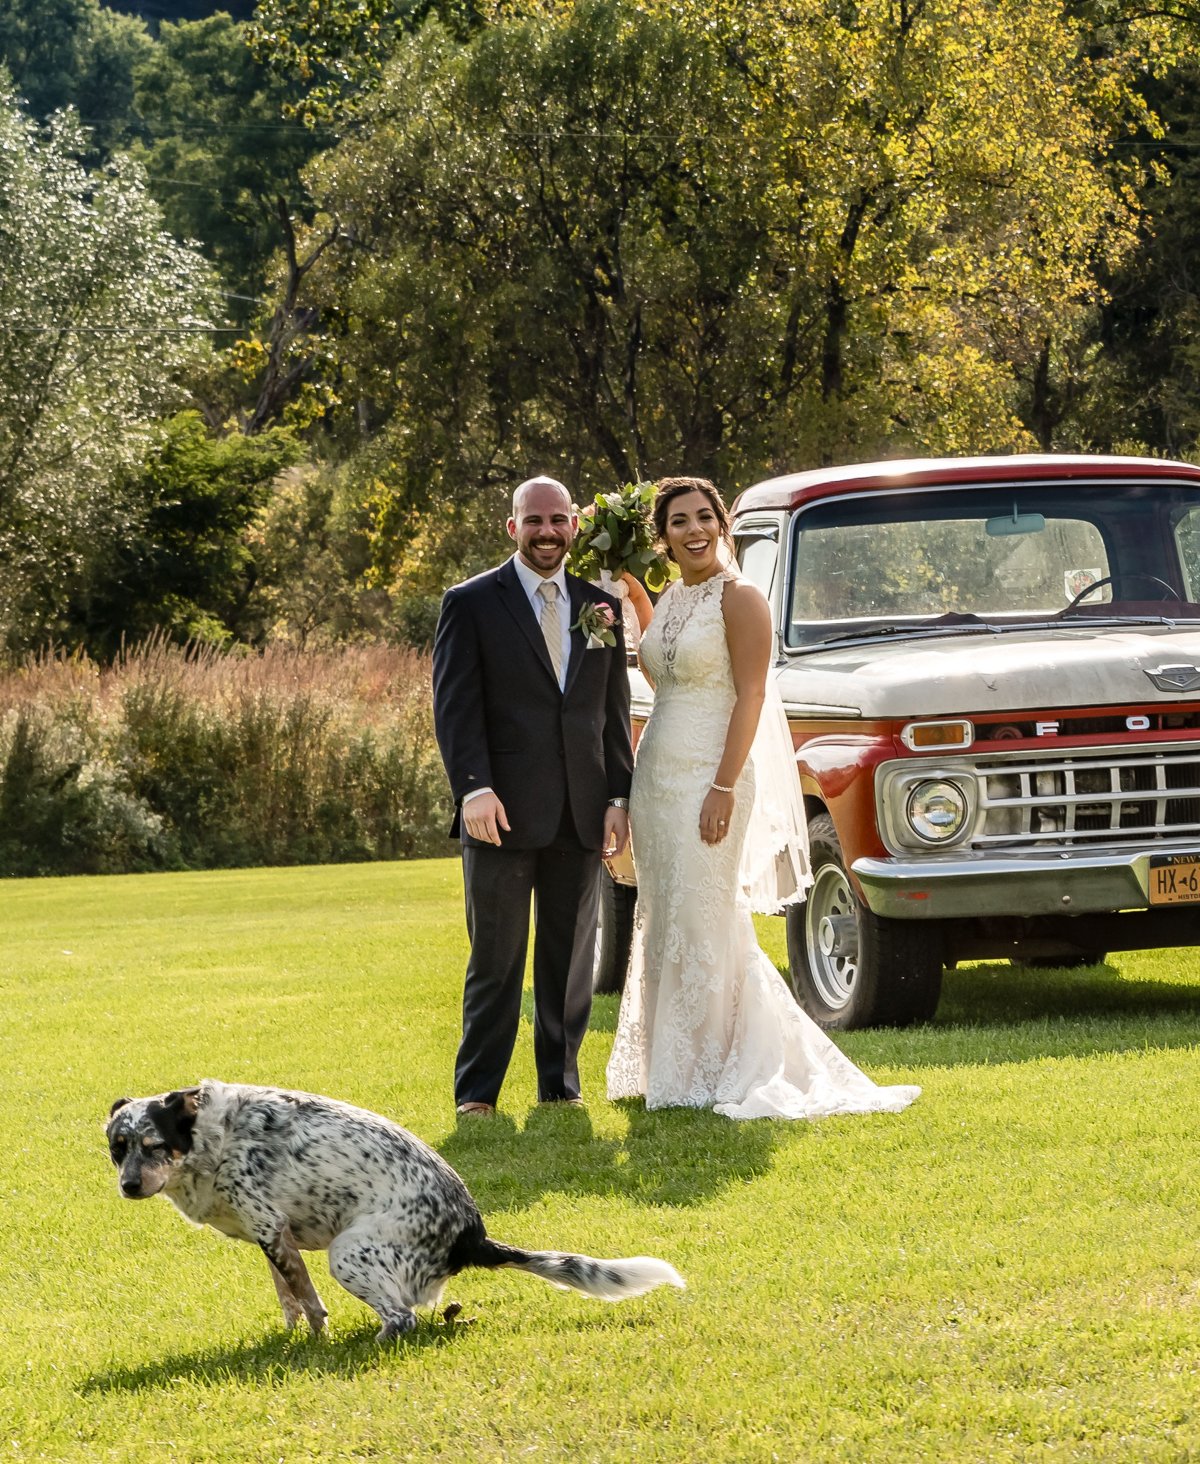 vinny and marisa getting married their dog going number 2 in the forefront of the picture